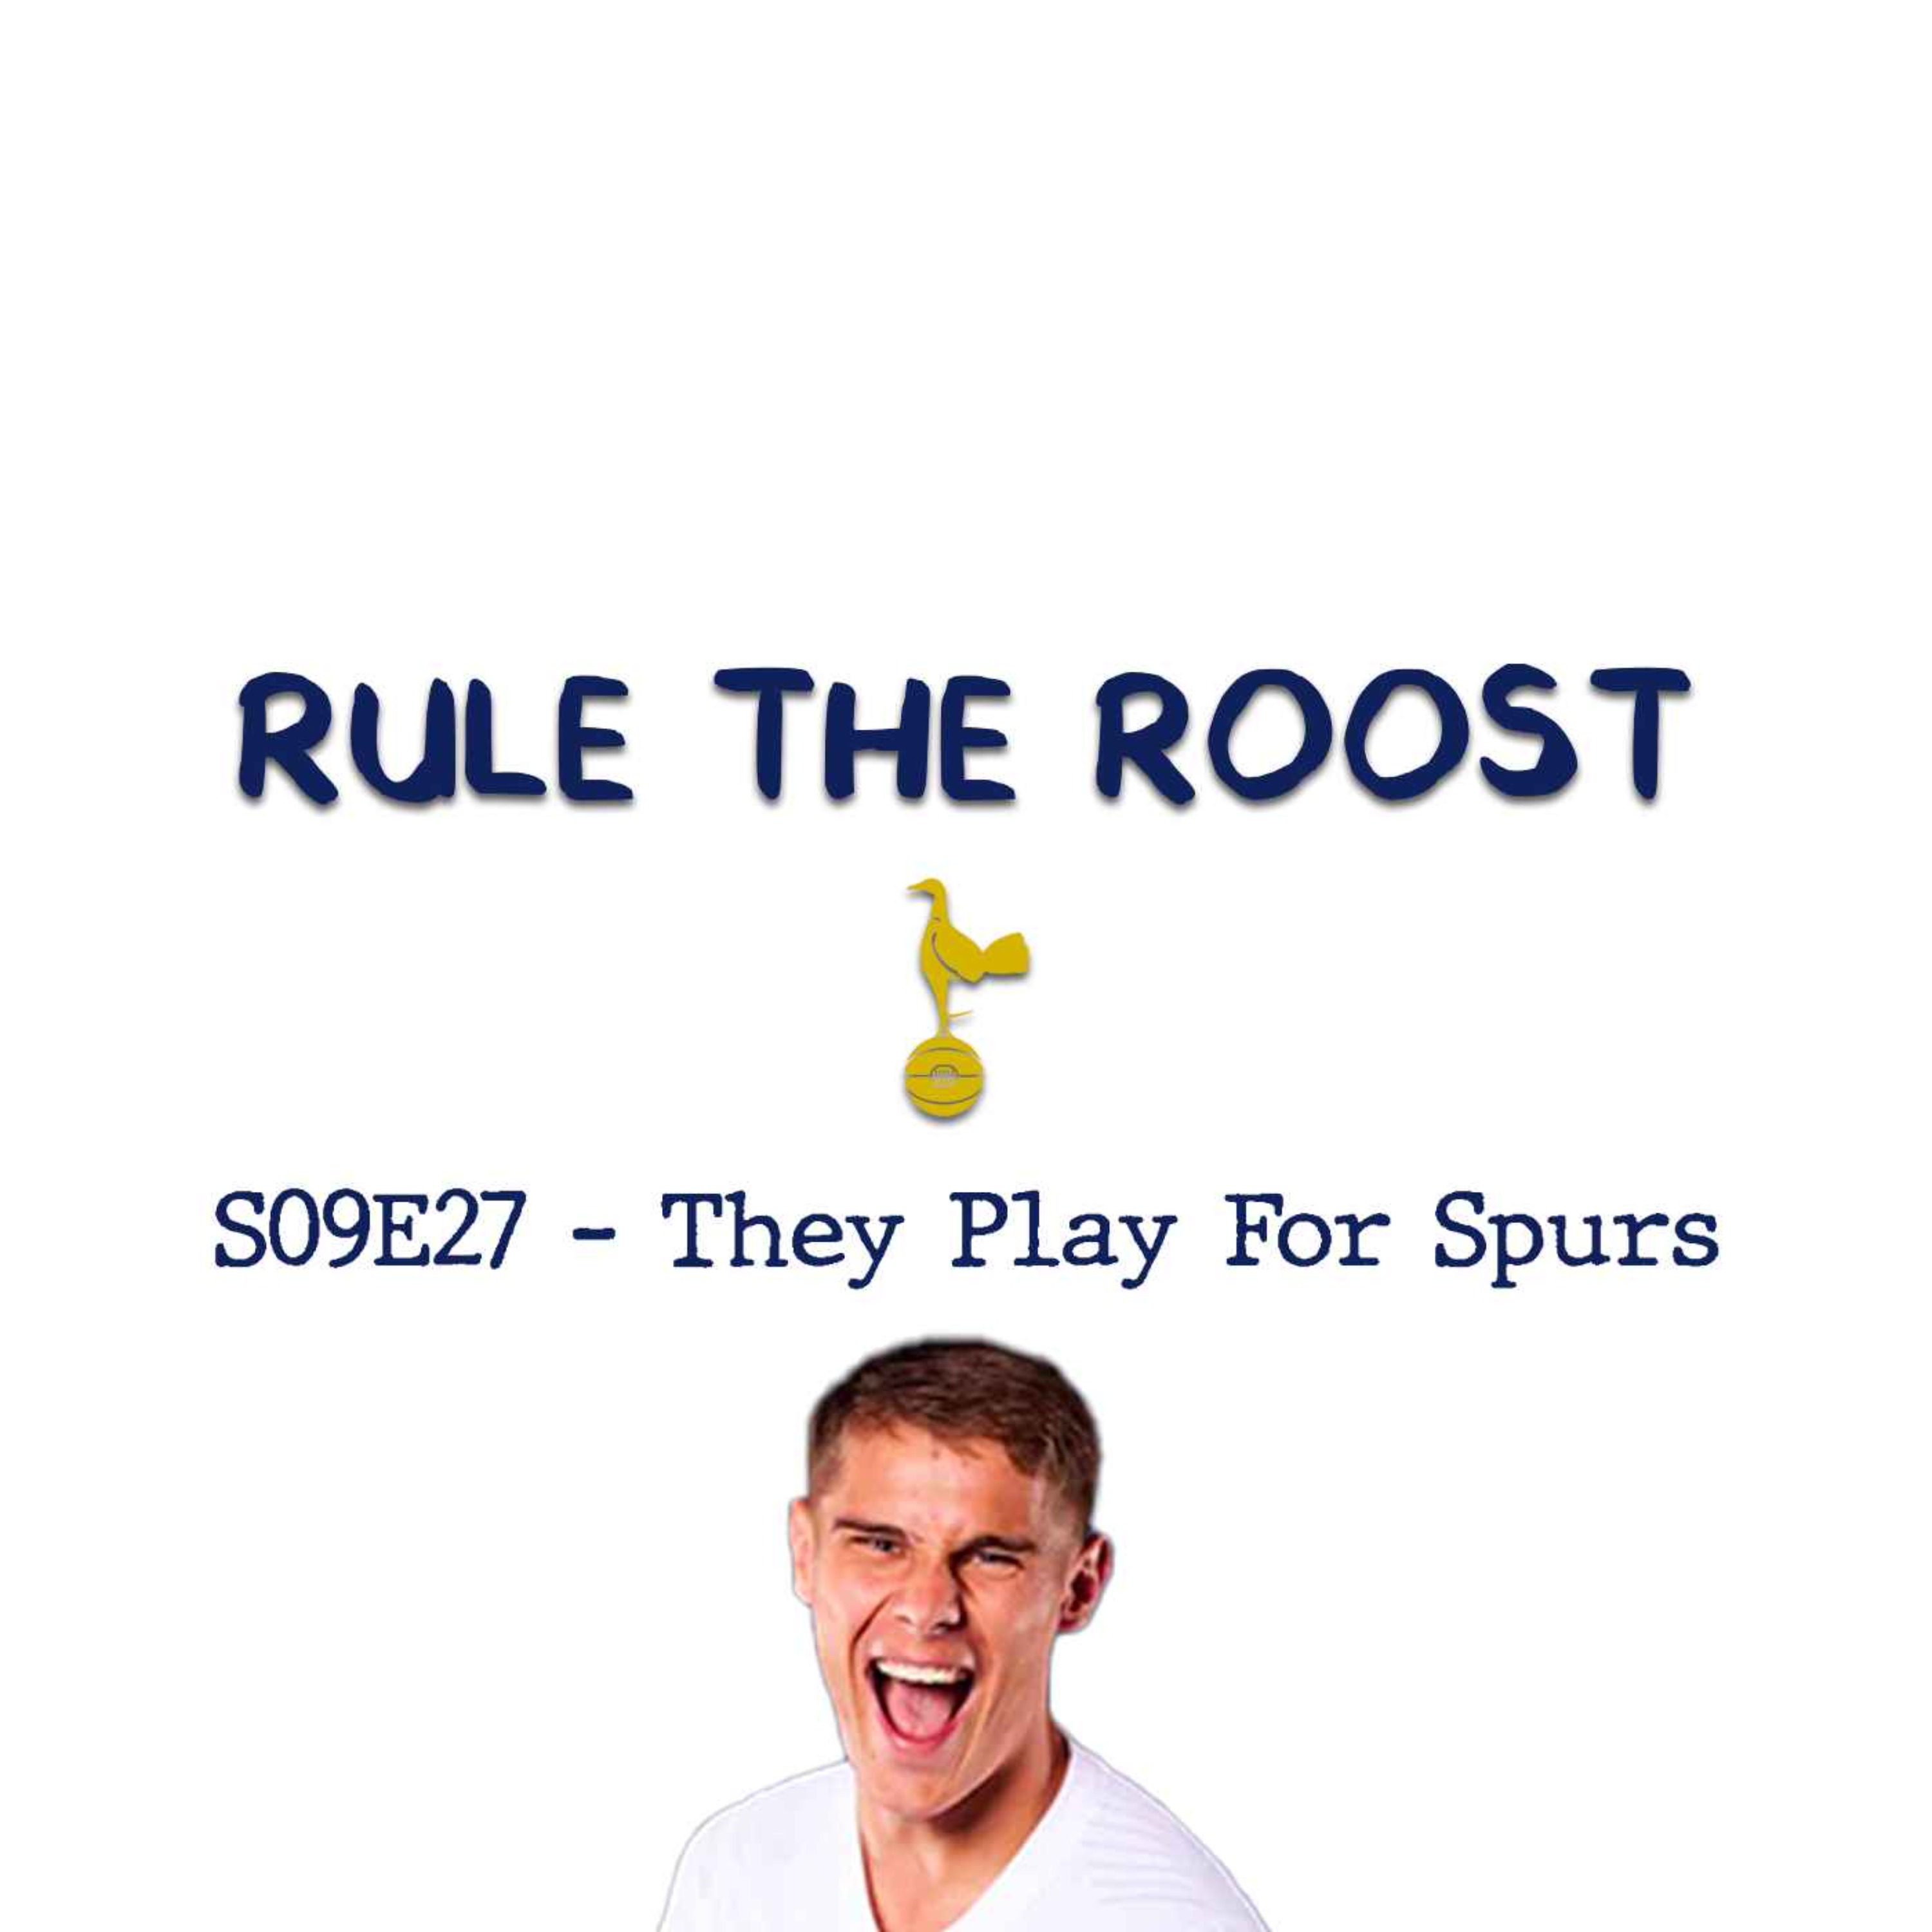 They Play For Spurs